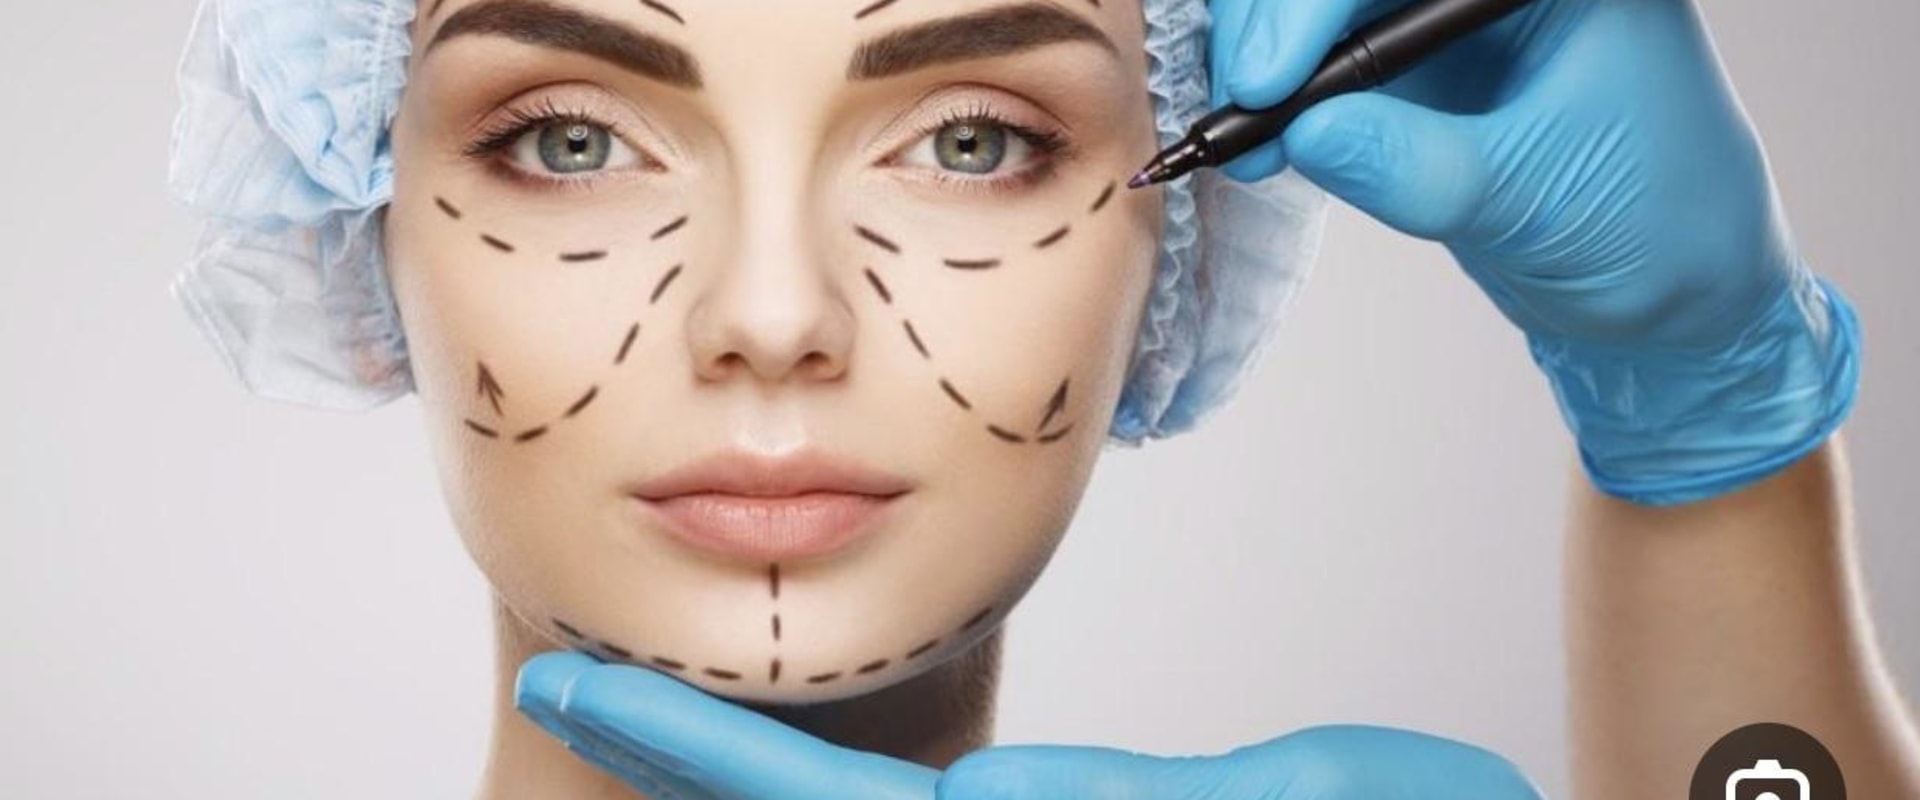 What is the safest plastic surgery?